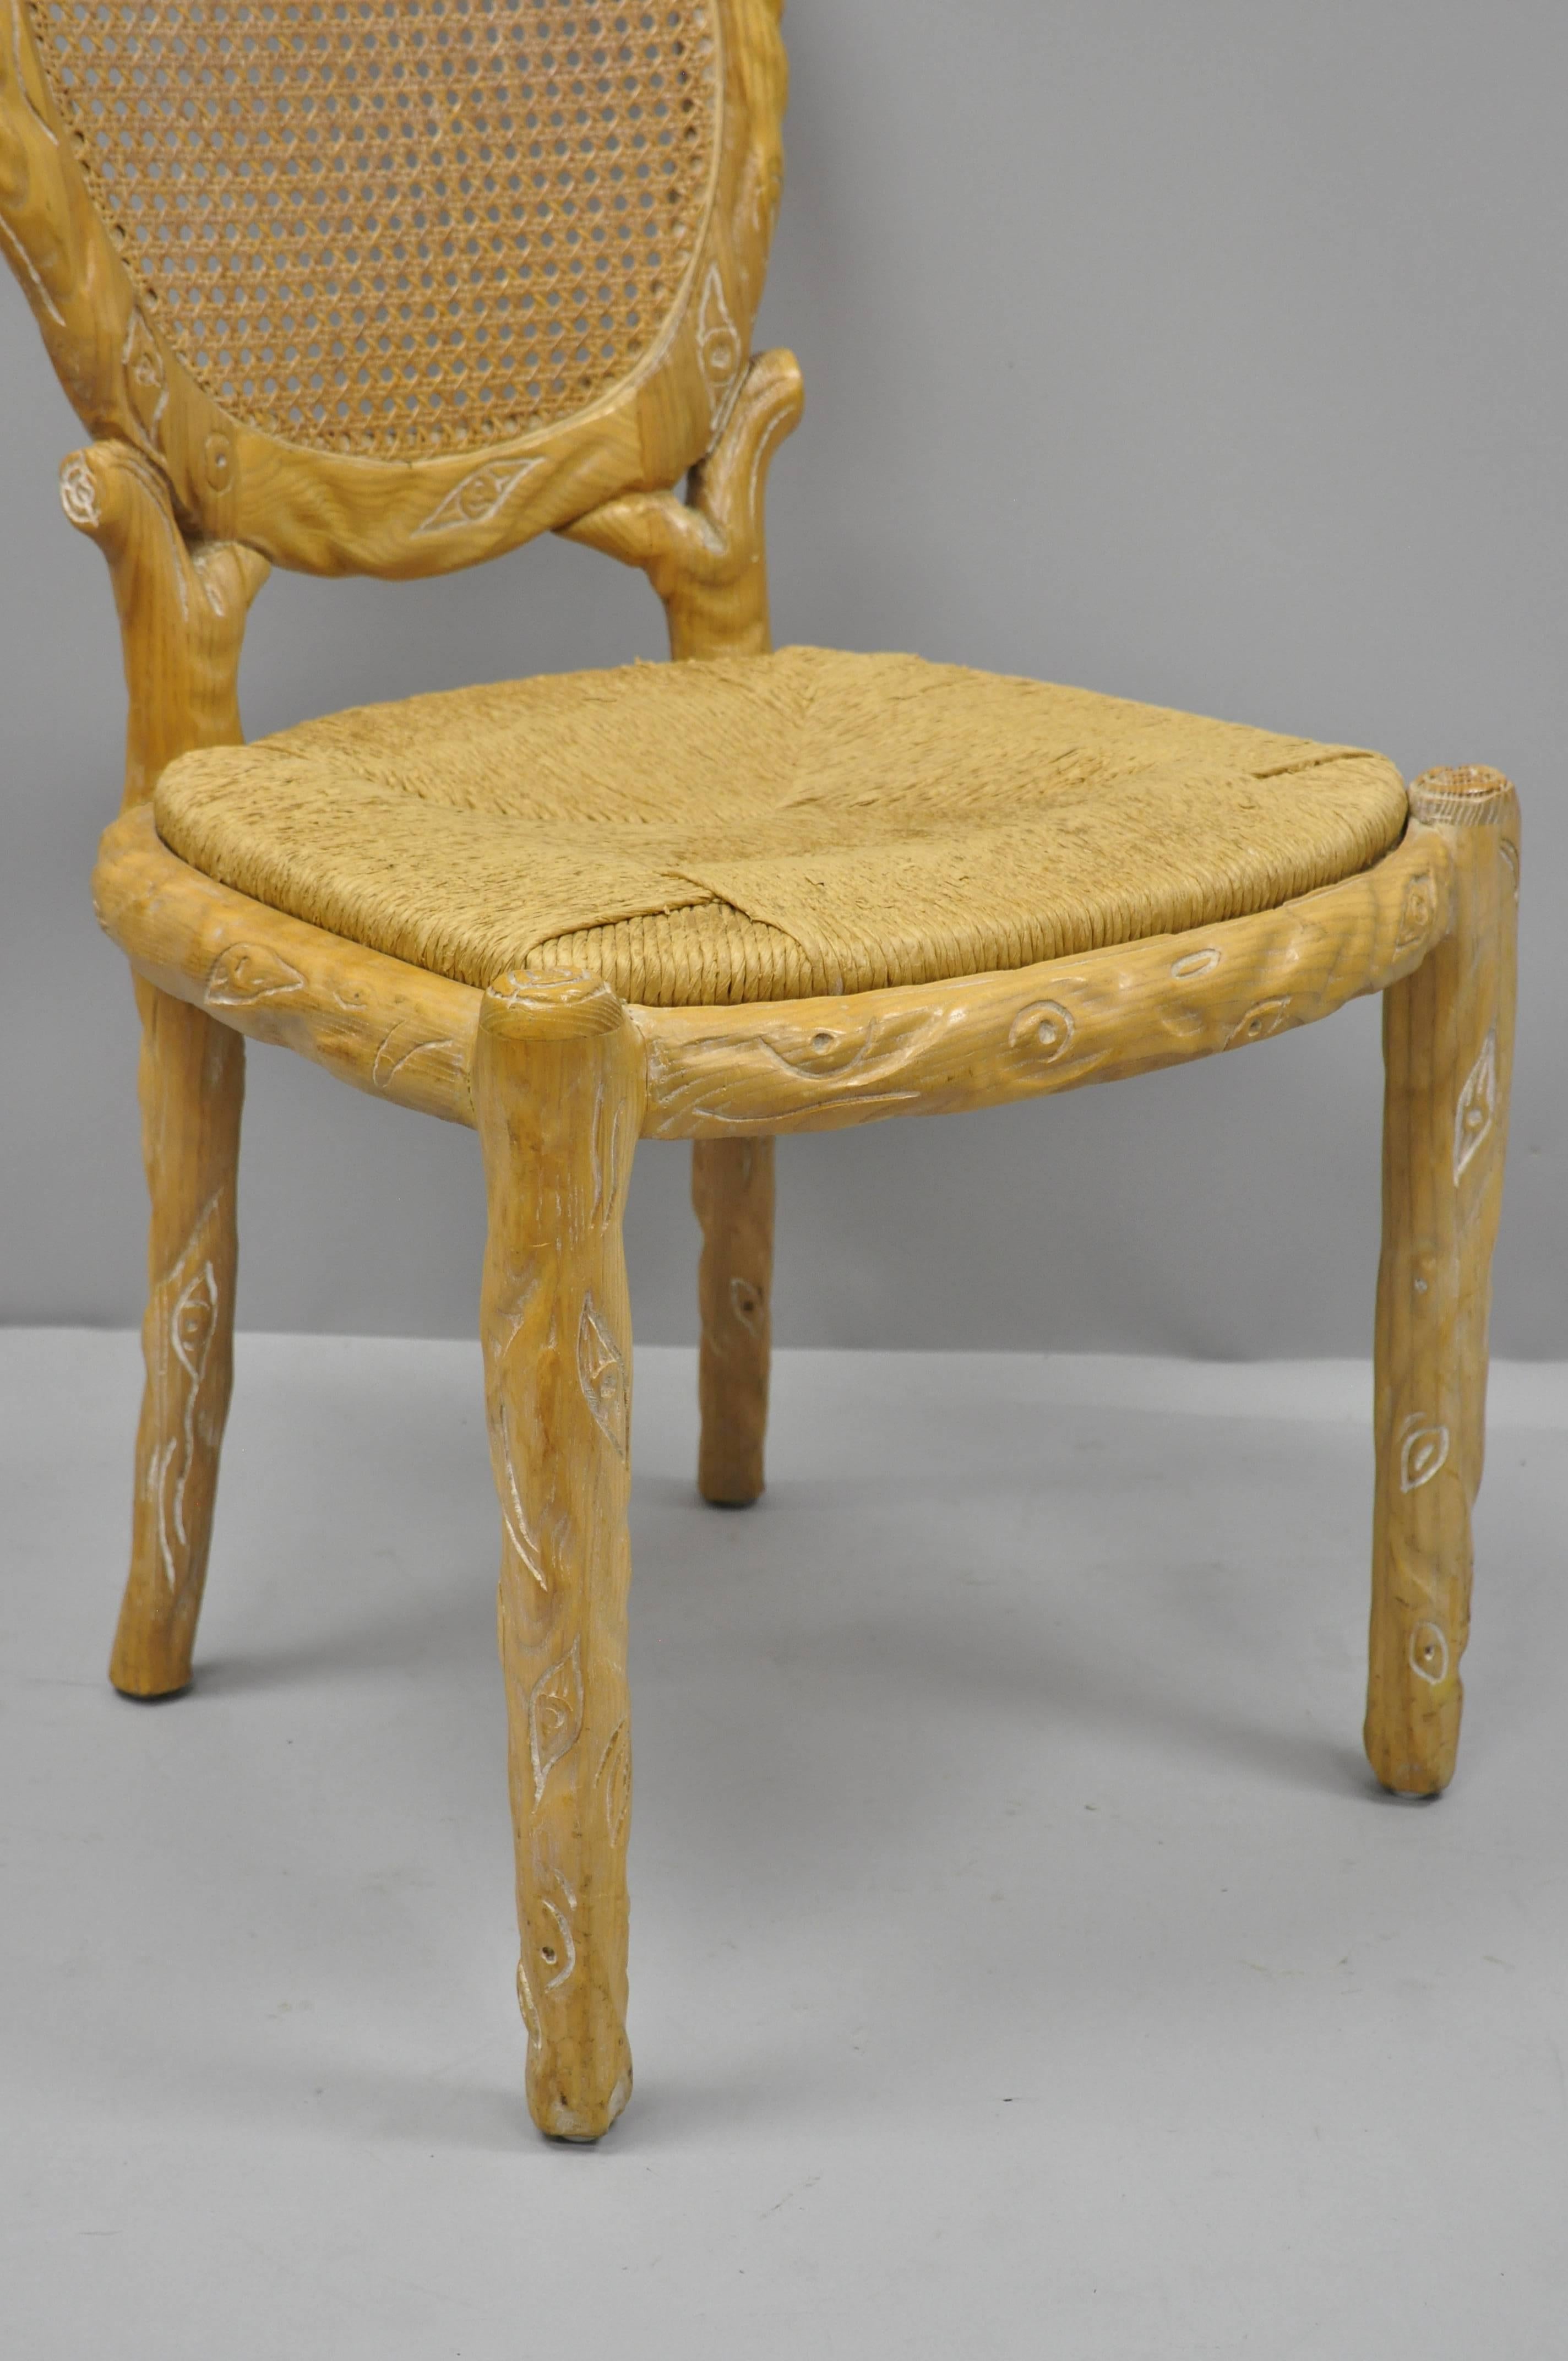 American Faux Bois Branch Form Cane Back Rush Seat Carved Wood Twig Dining Chair Set For Sale